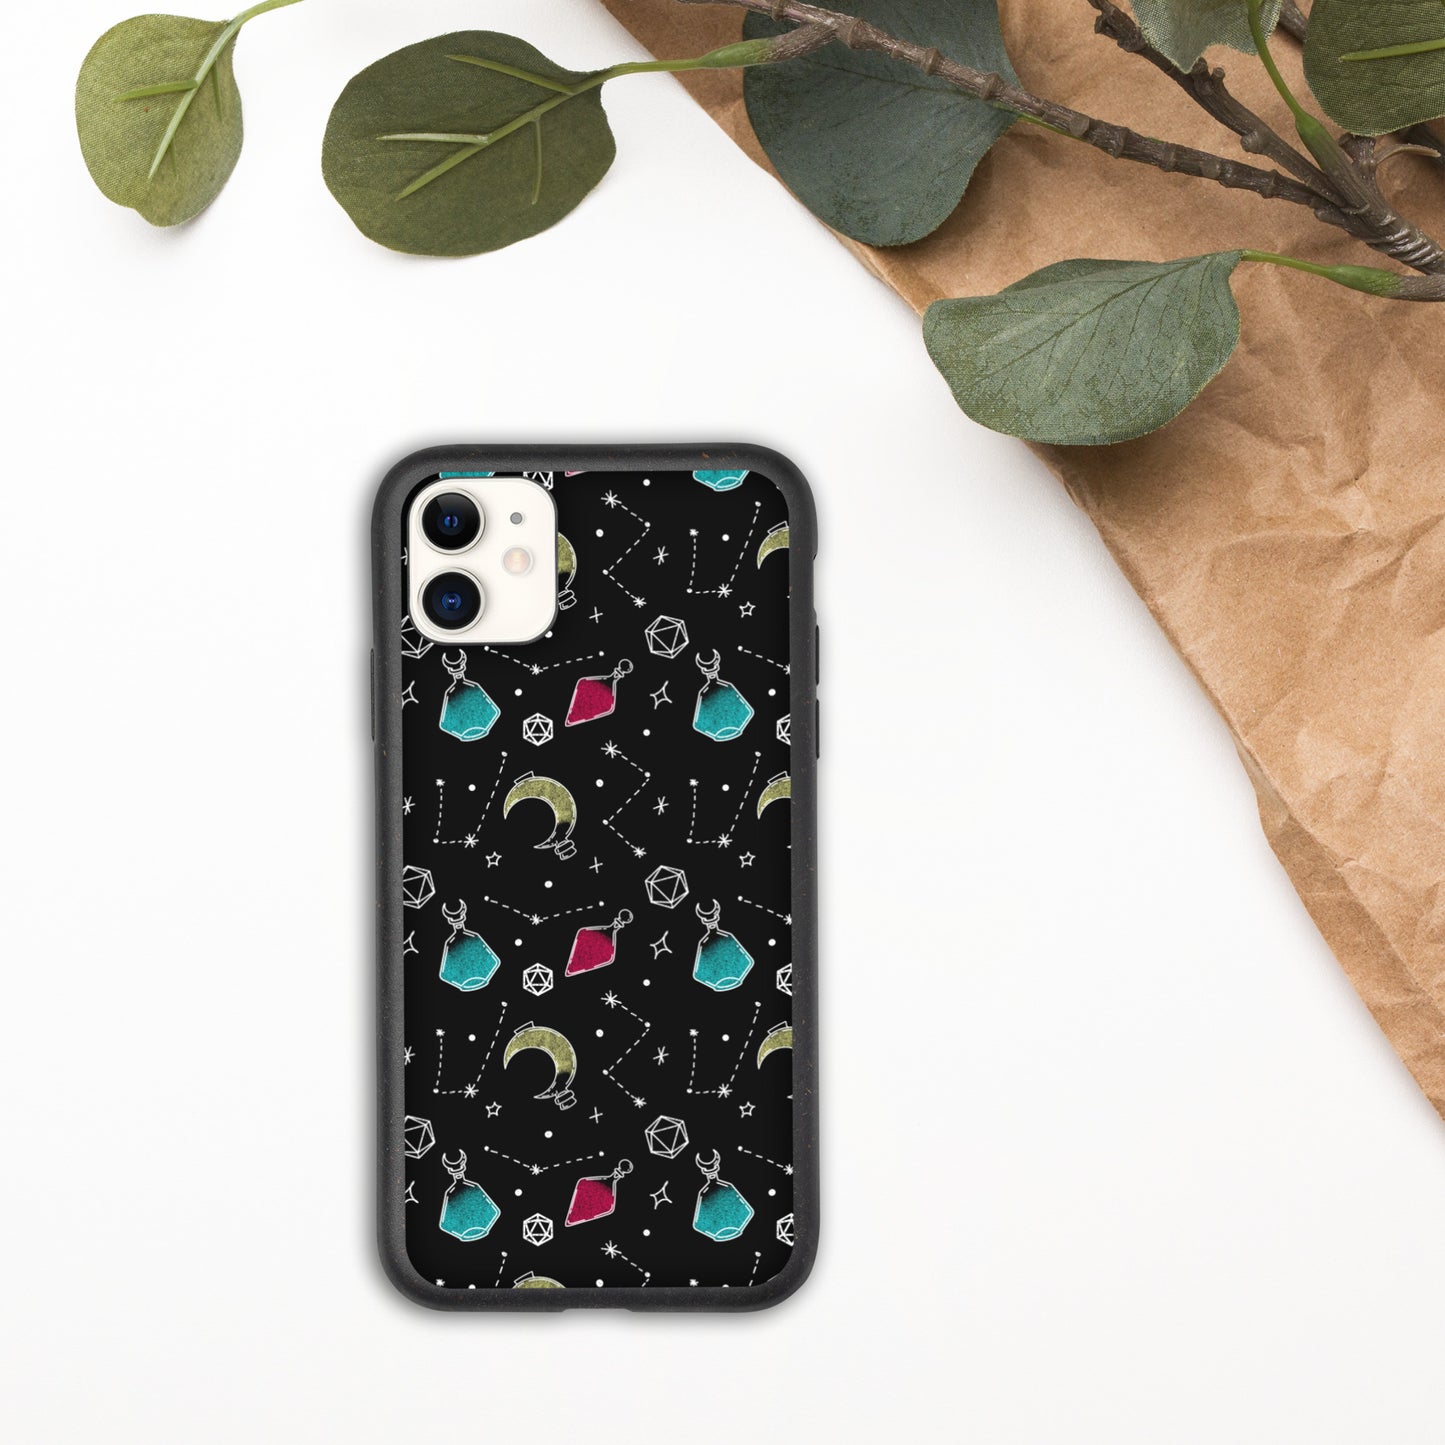 Potions and Dice Biodegradable iPhone case